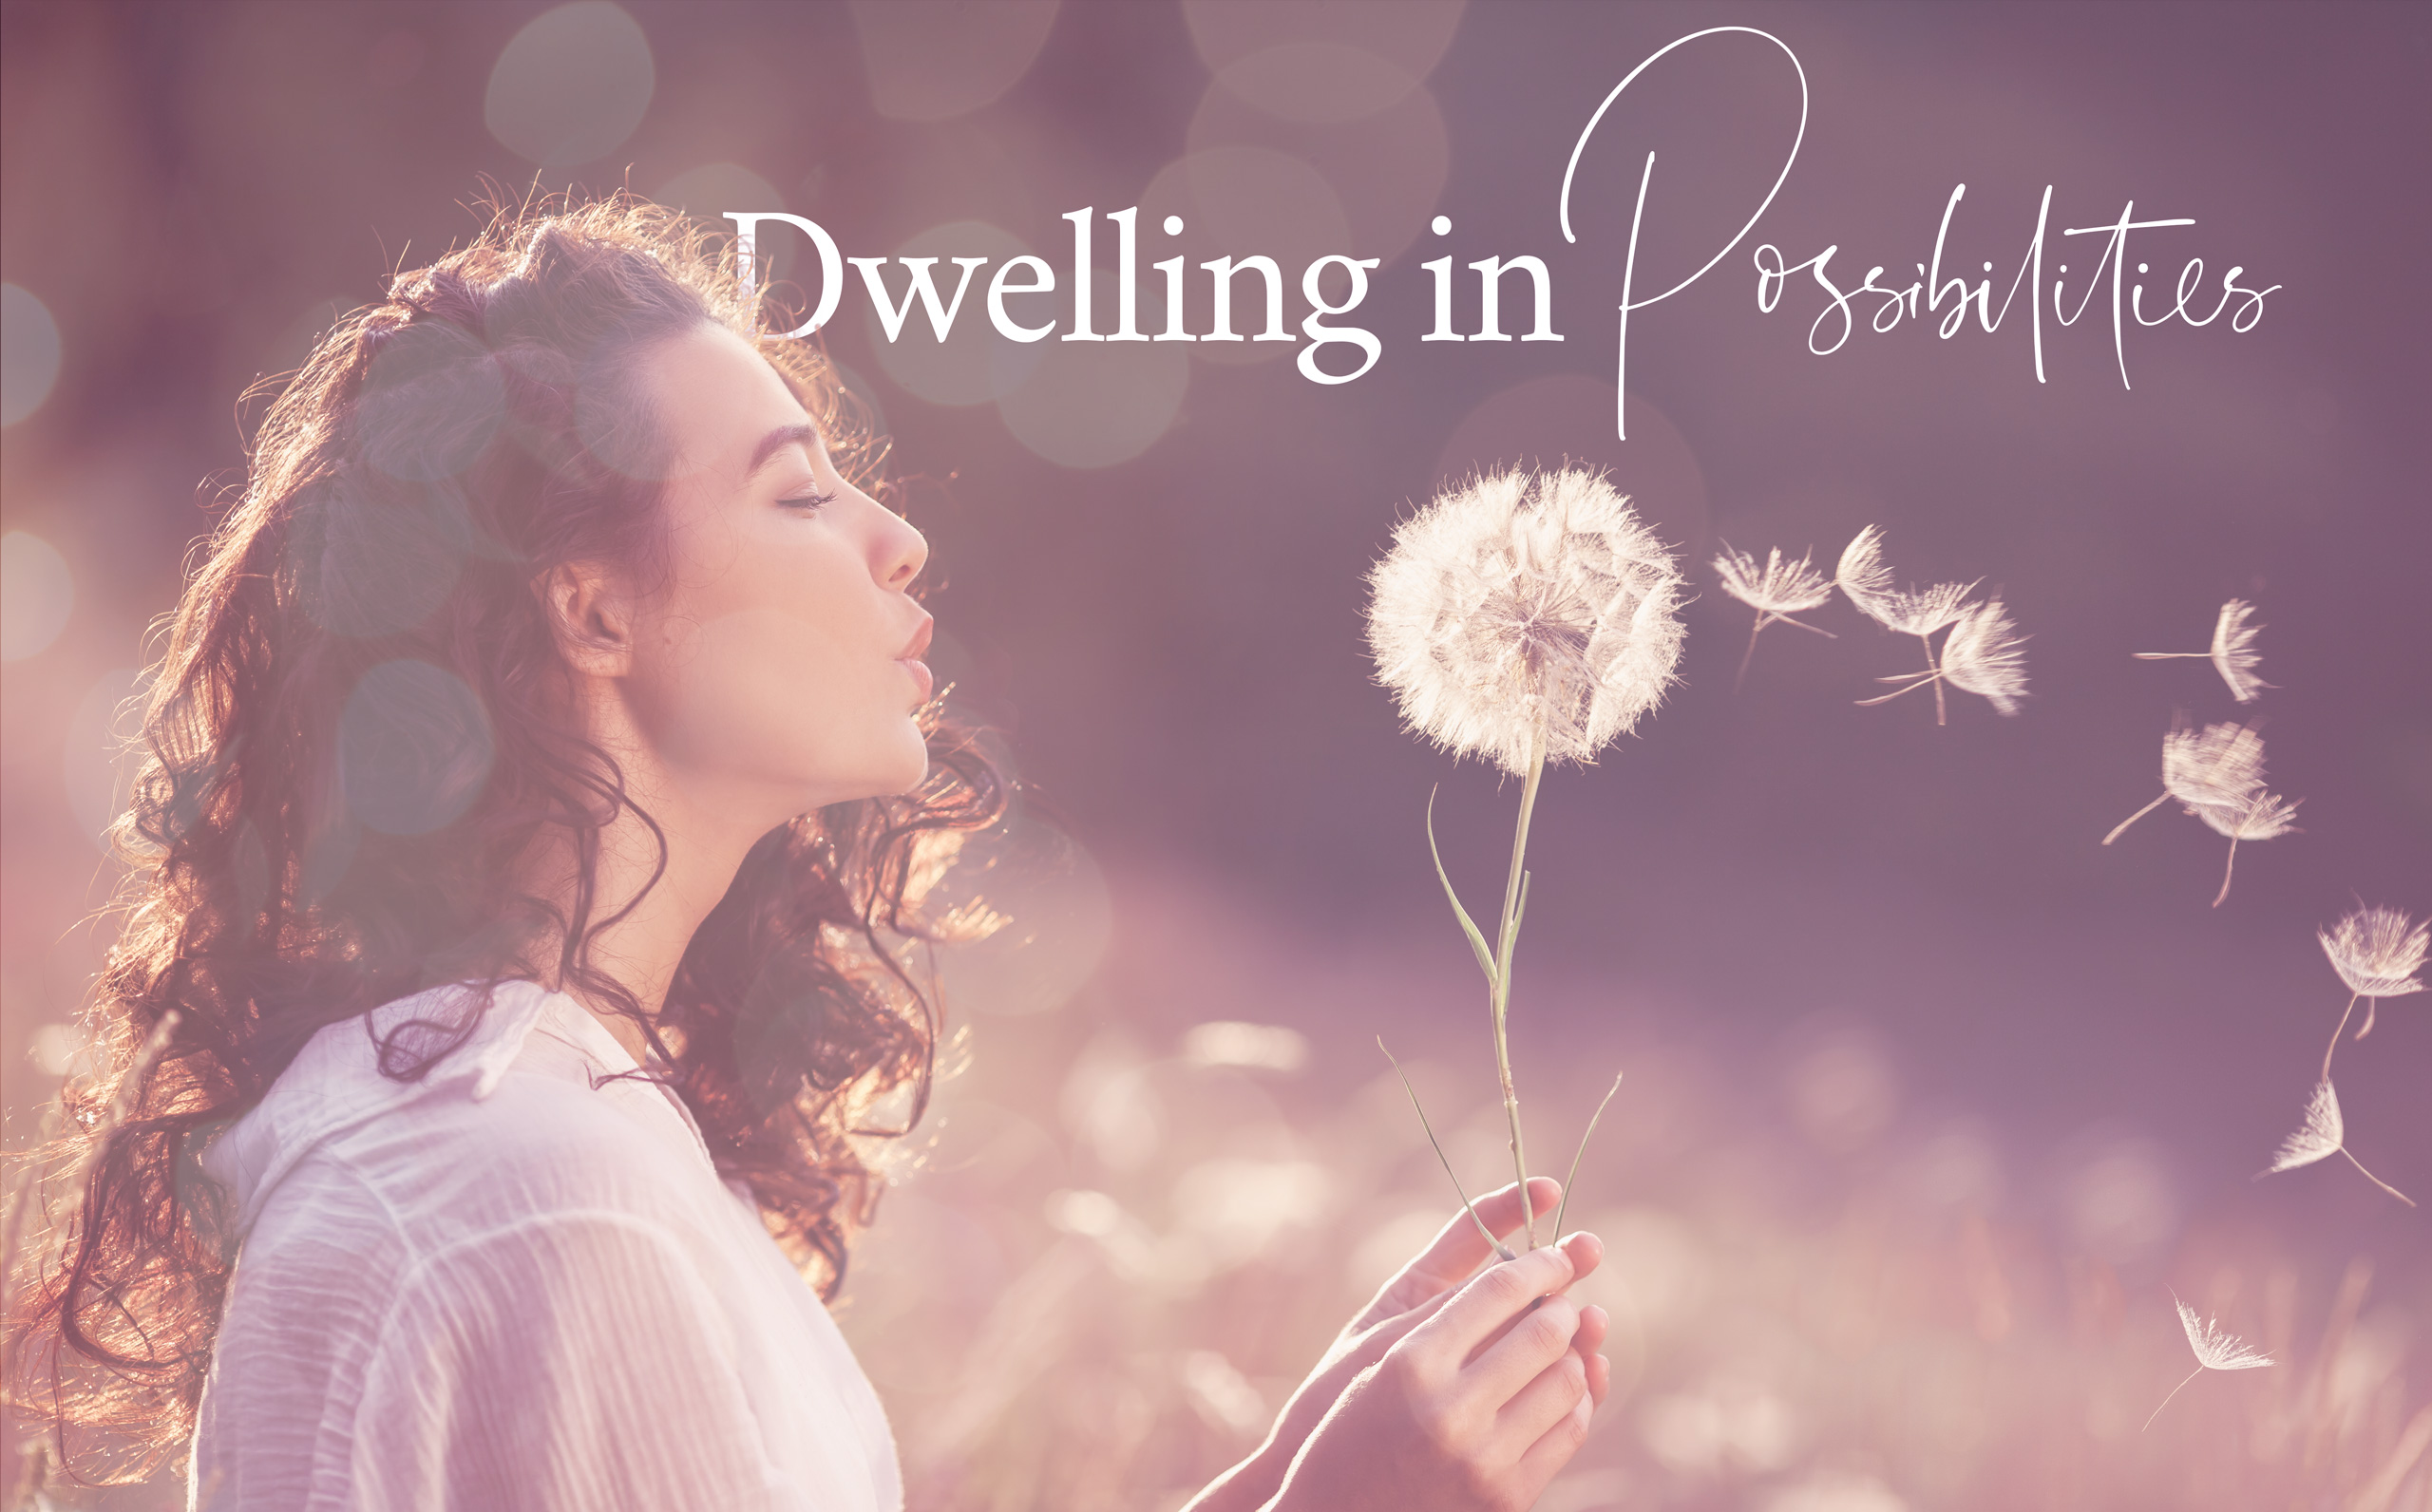 Dwelling in Possibilities